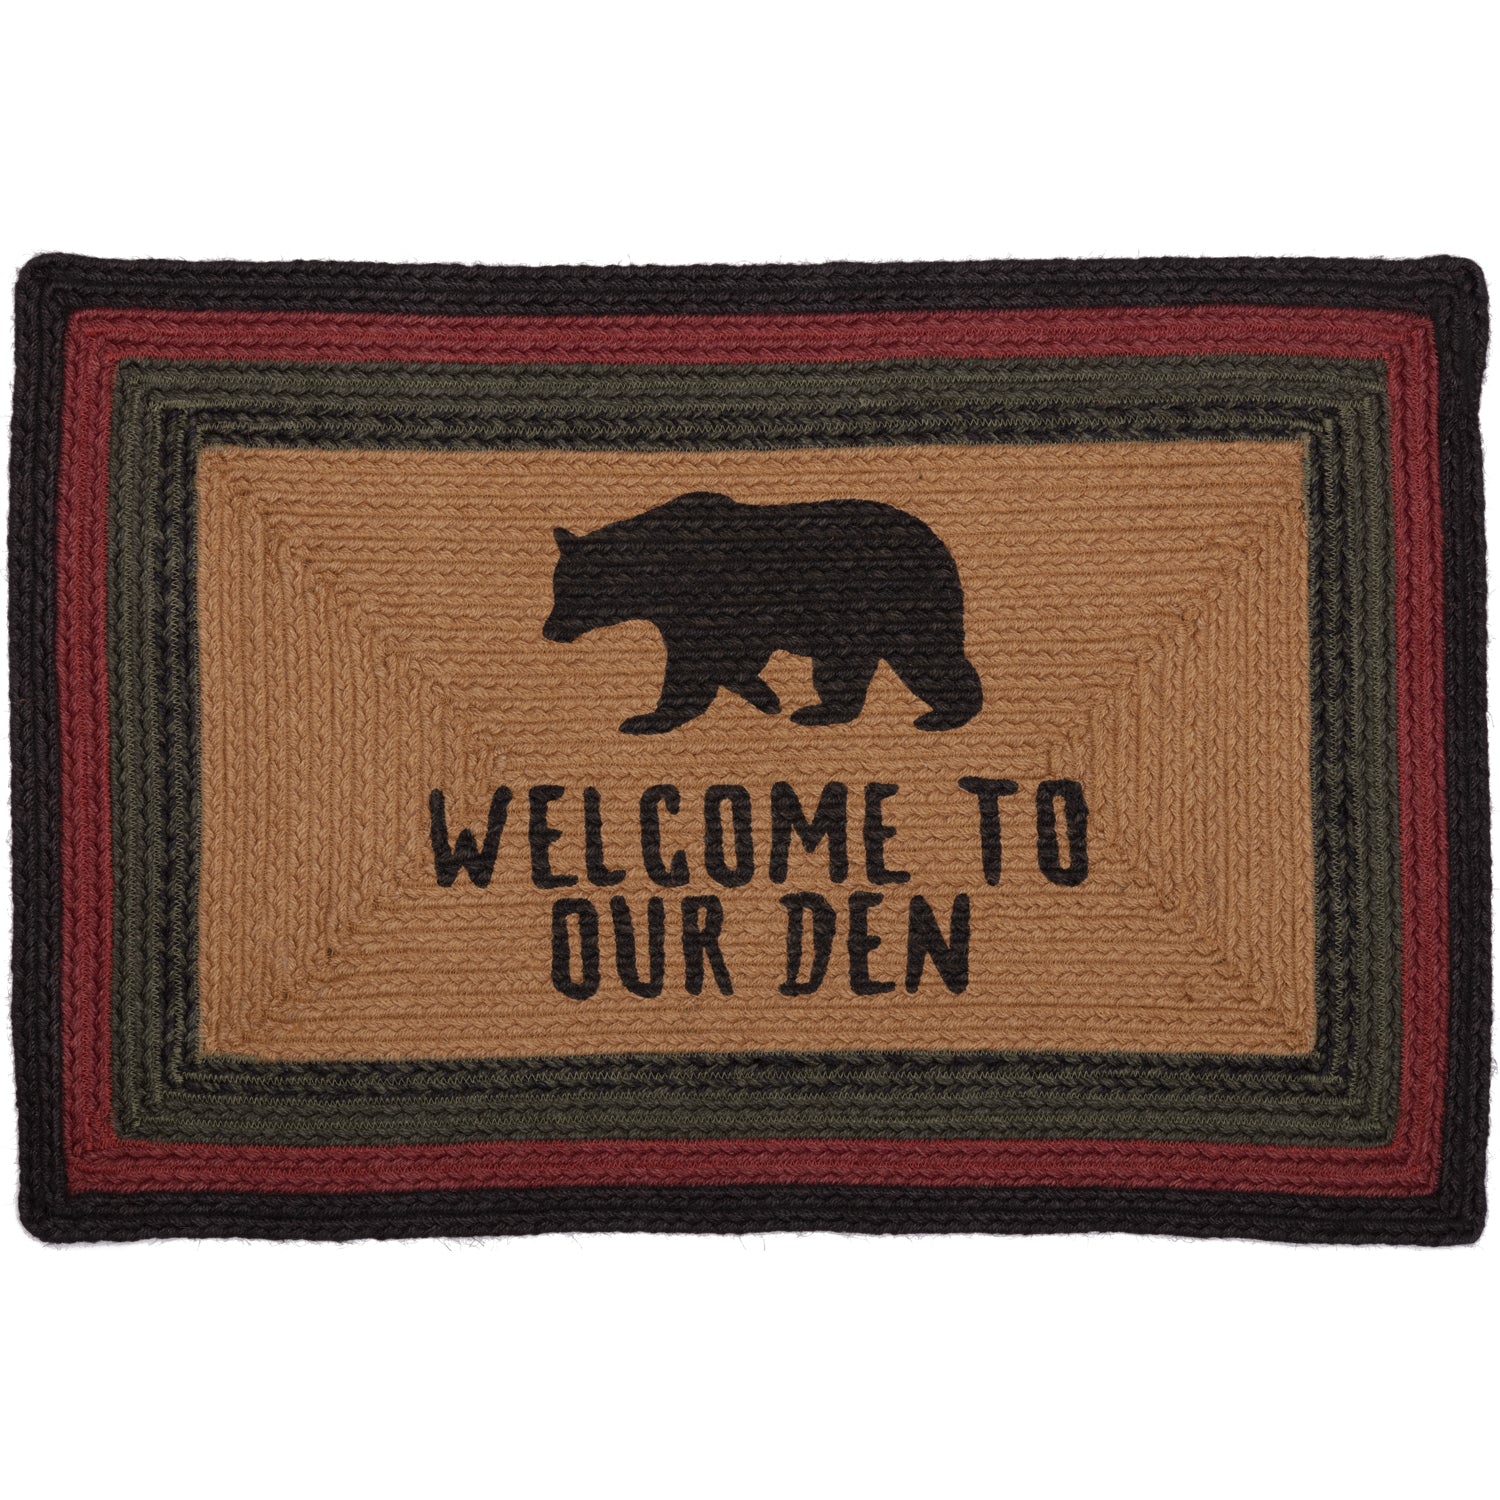 70596-Wyatt-Stenciled-Bear-Jute-Rug-Rect-Welcome-to-Our-Den-w-Pad-20x30-image-6